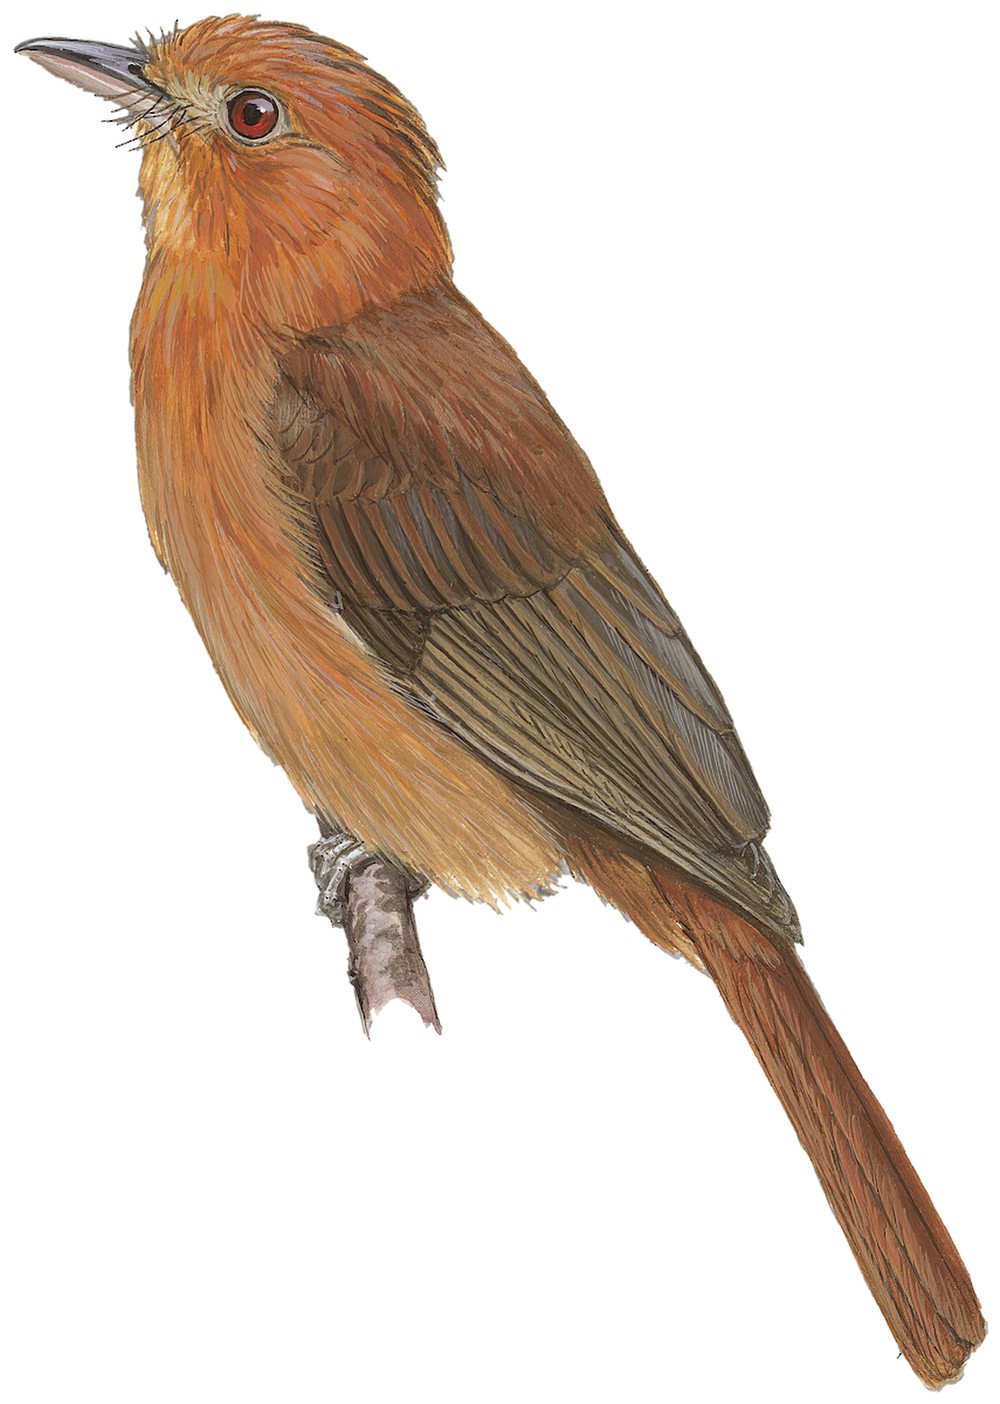 Rufous Twistwing / Cnipodectes superrufus